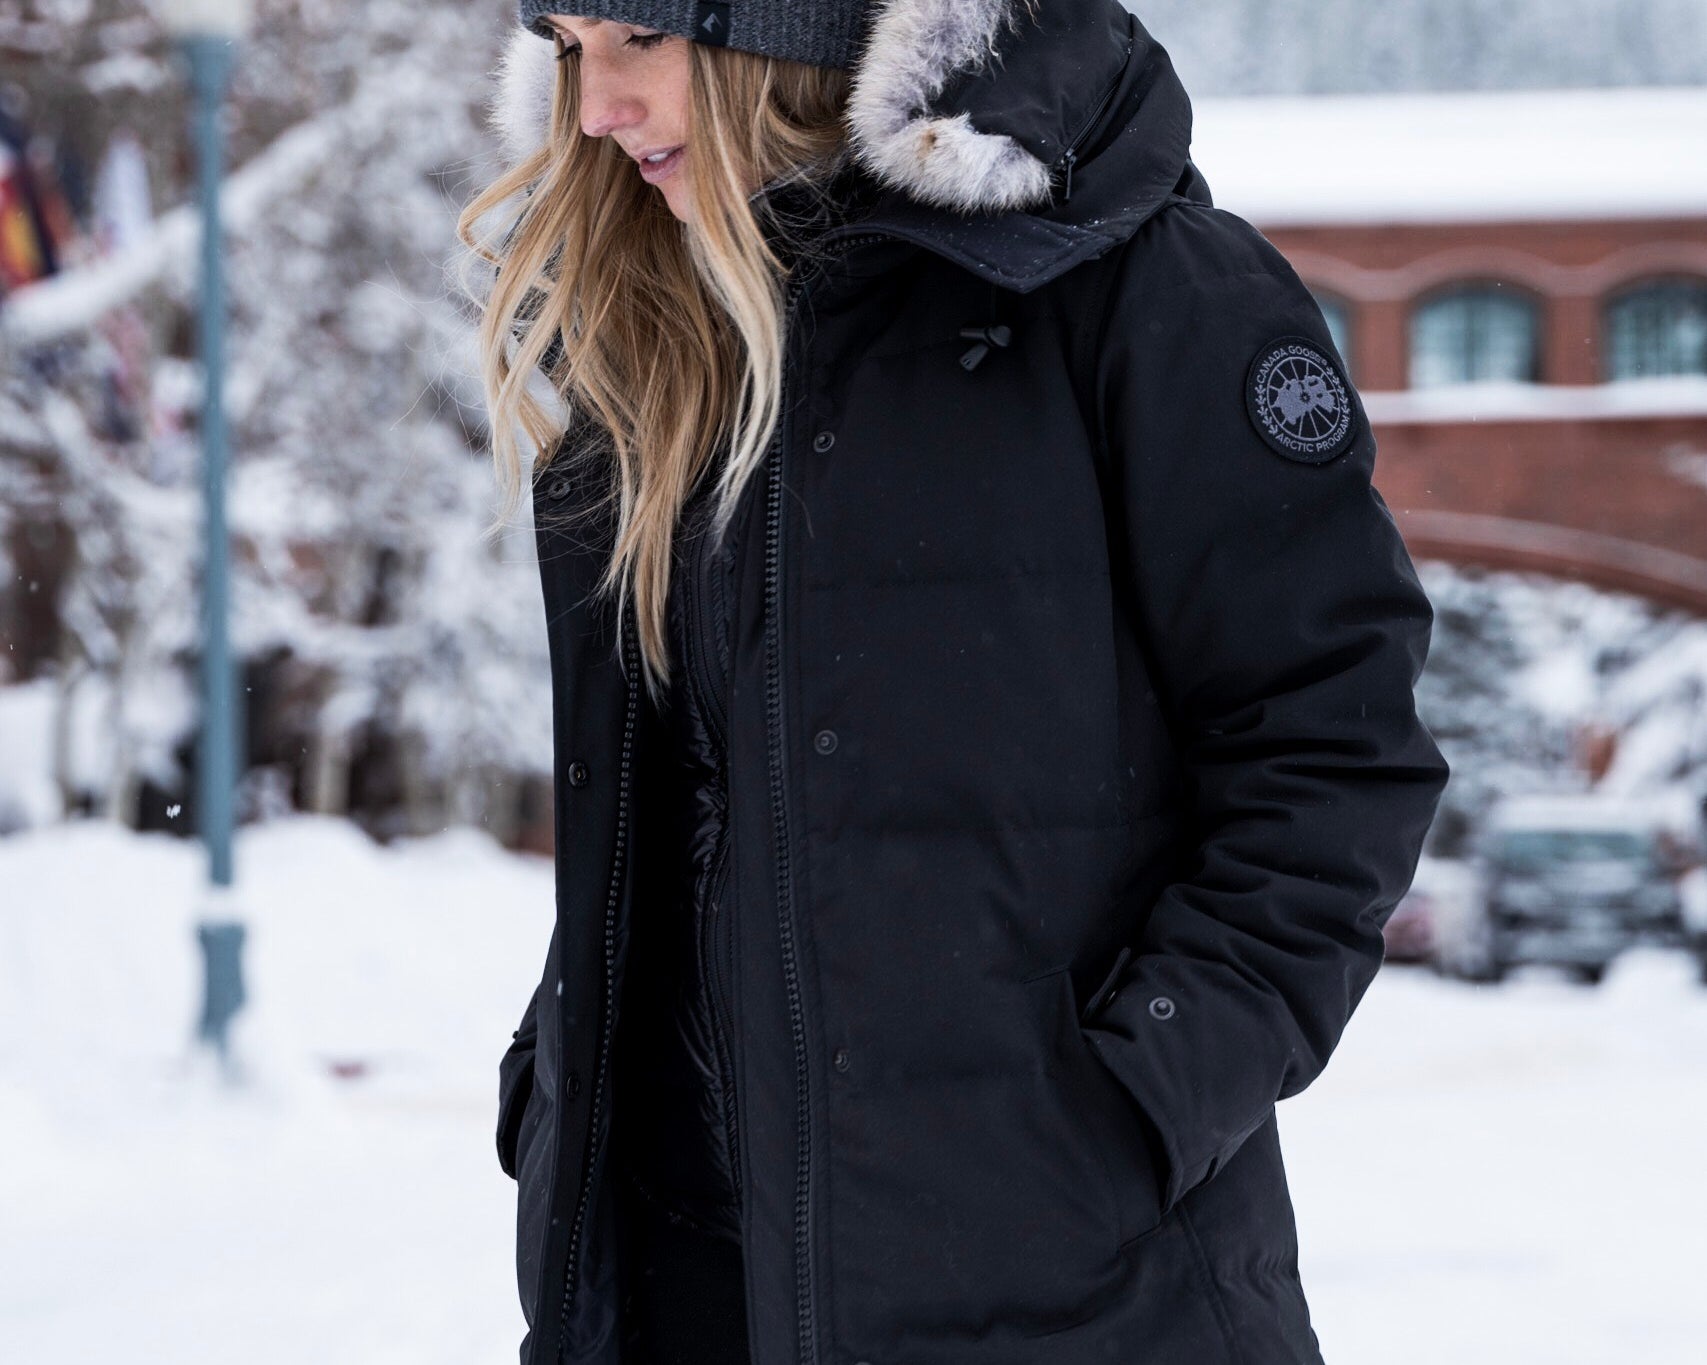 Dress for Success: Everyday Layering for Cold Weather